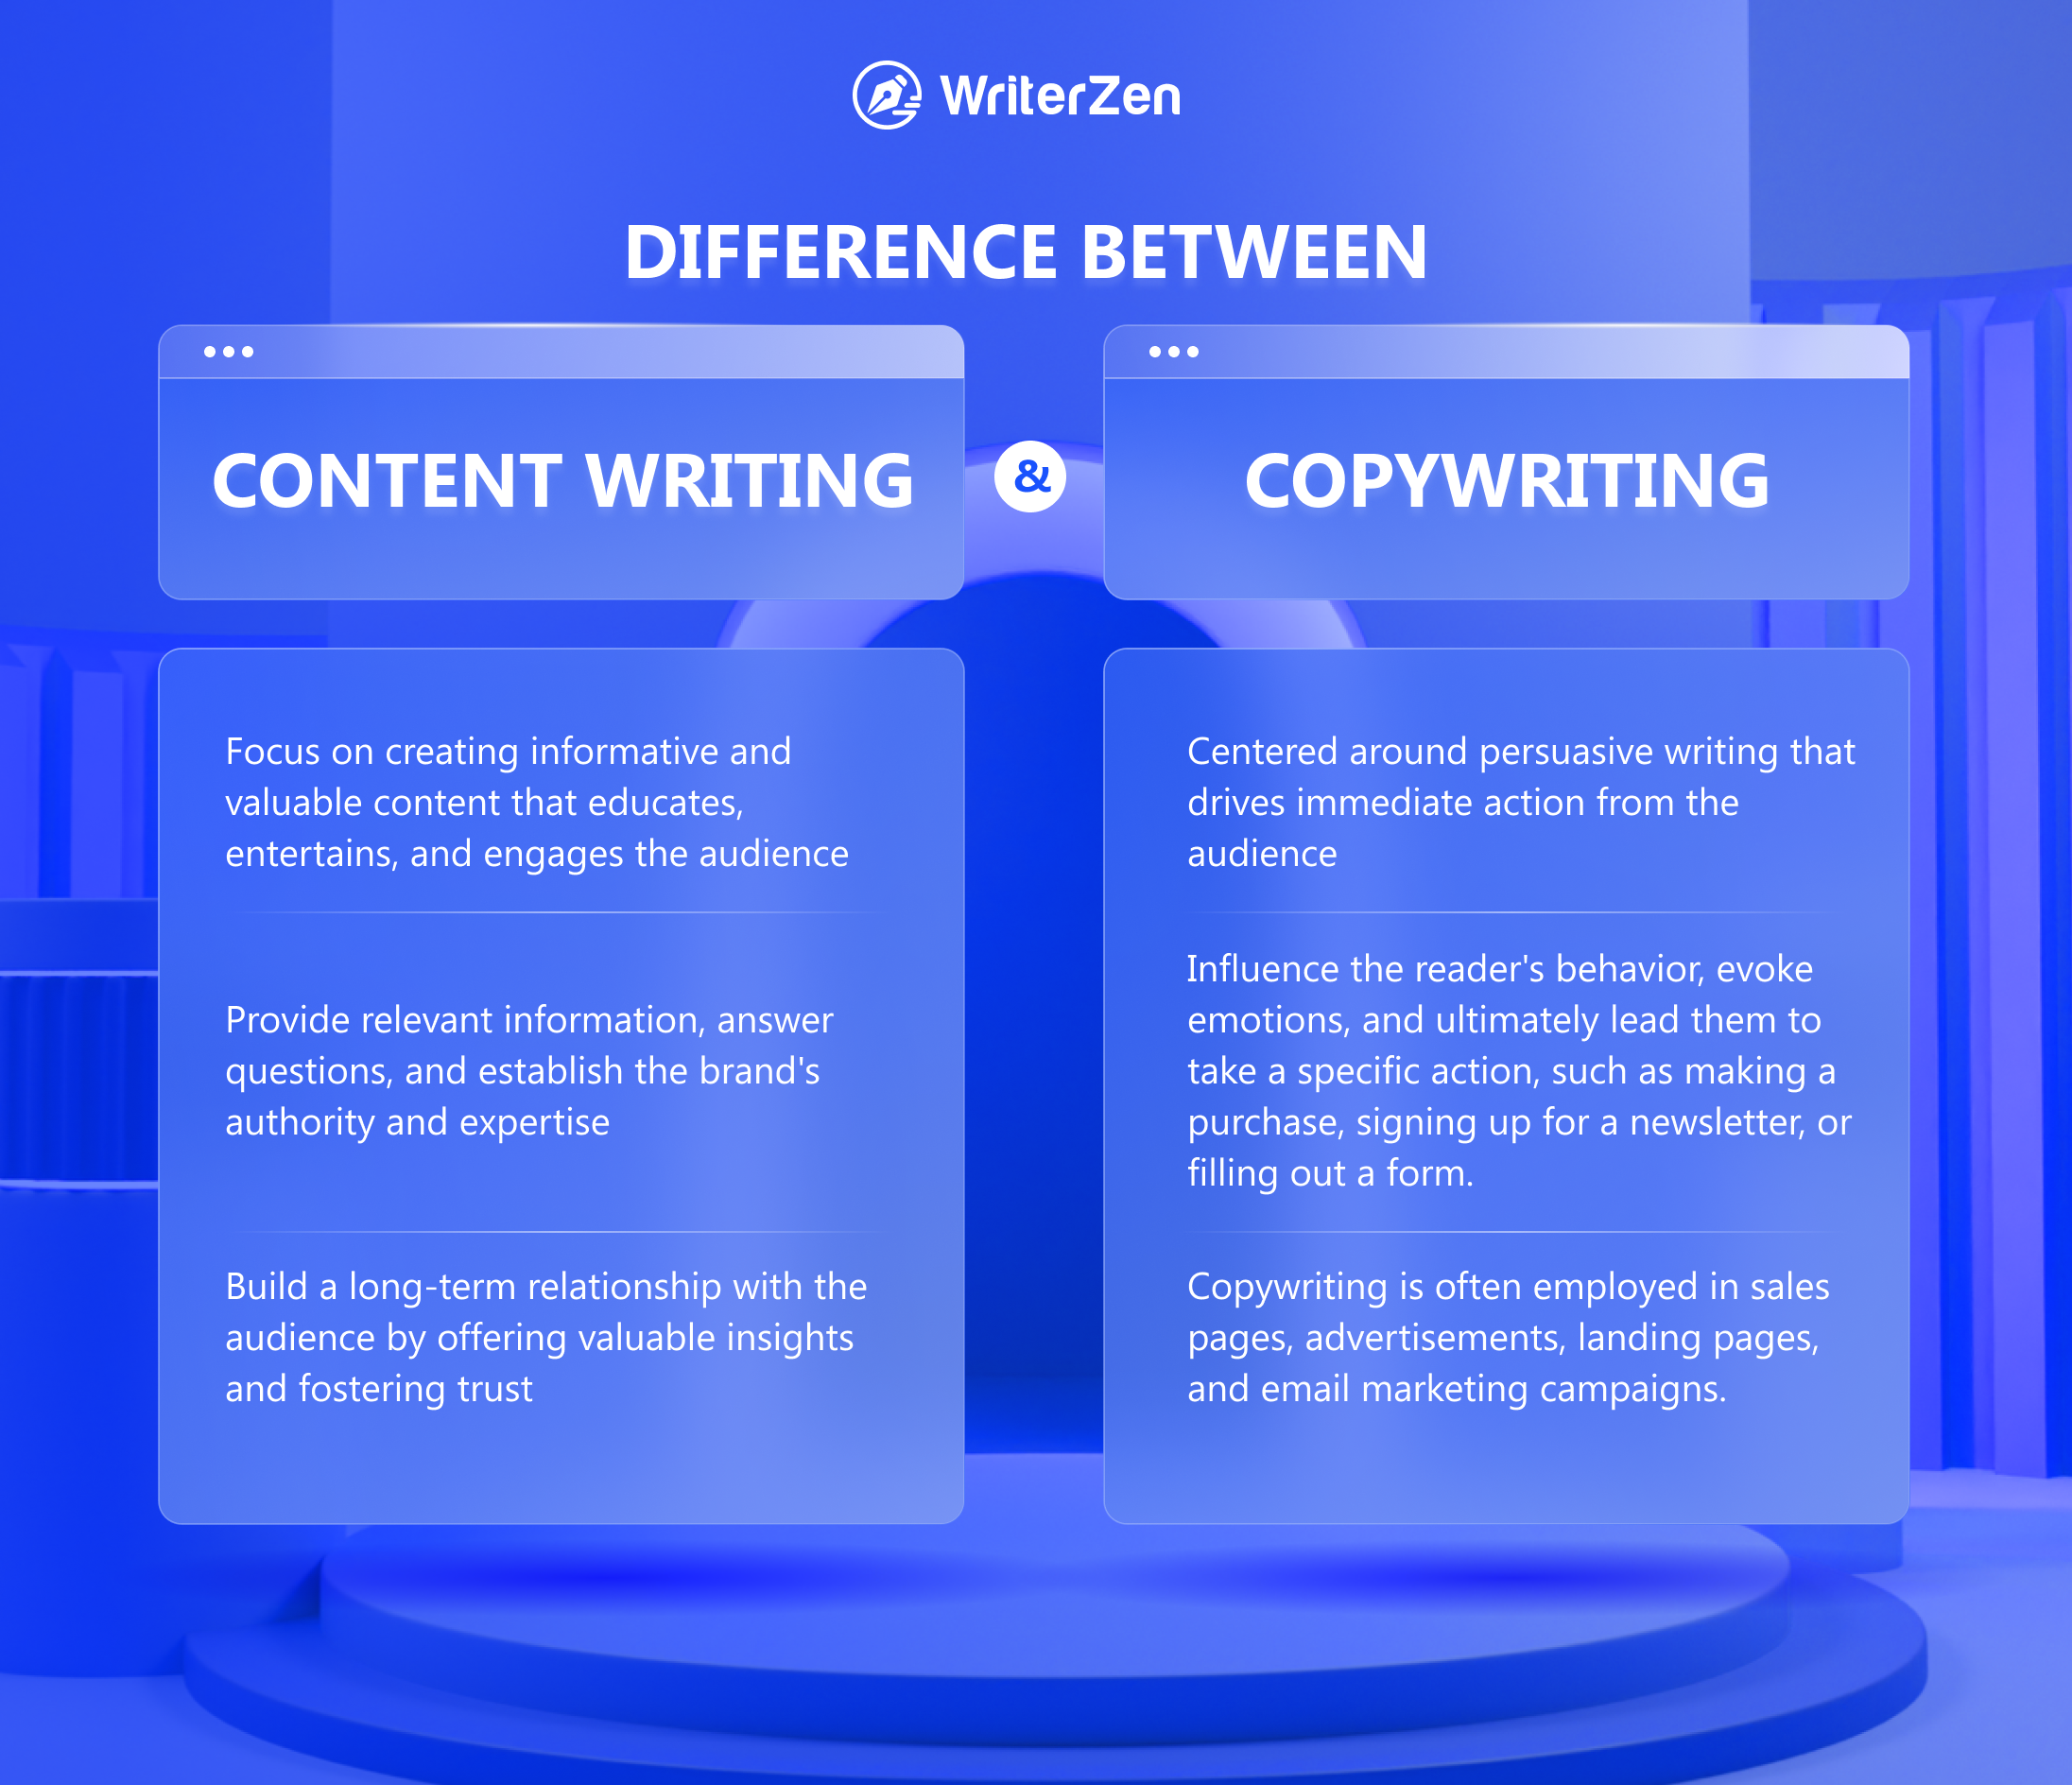 Difference between Content Writing and Copywriting